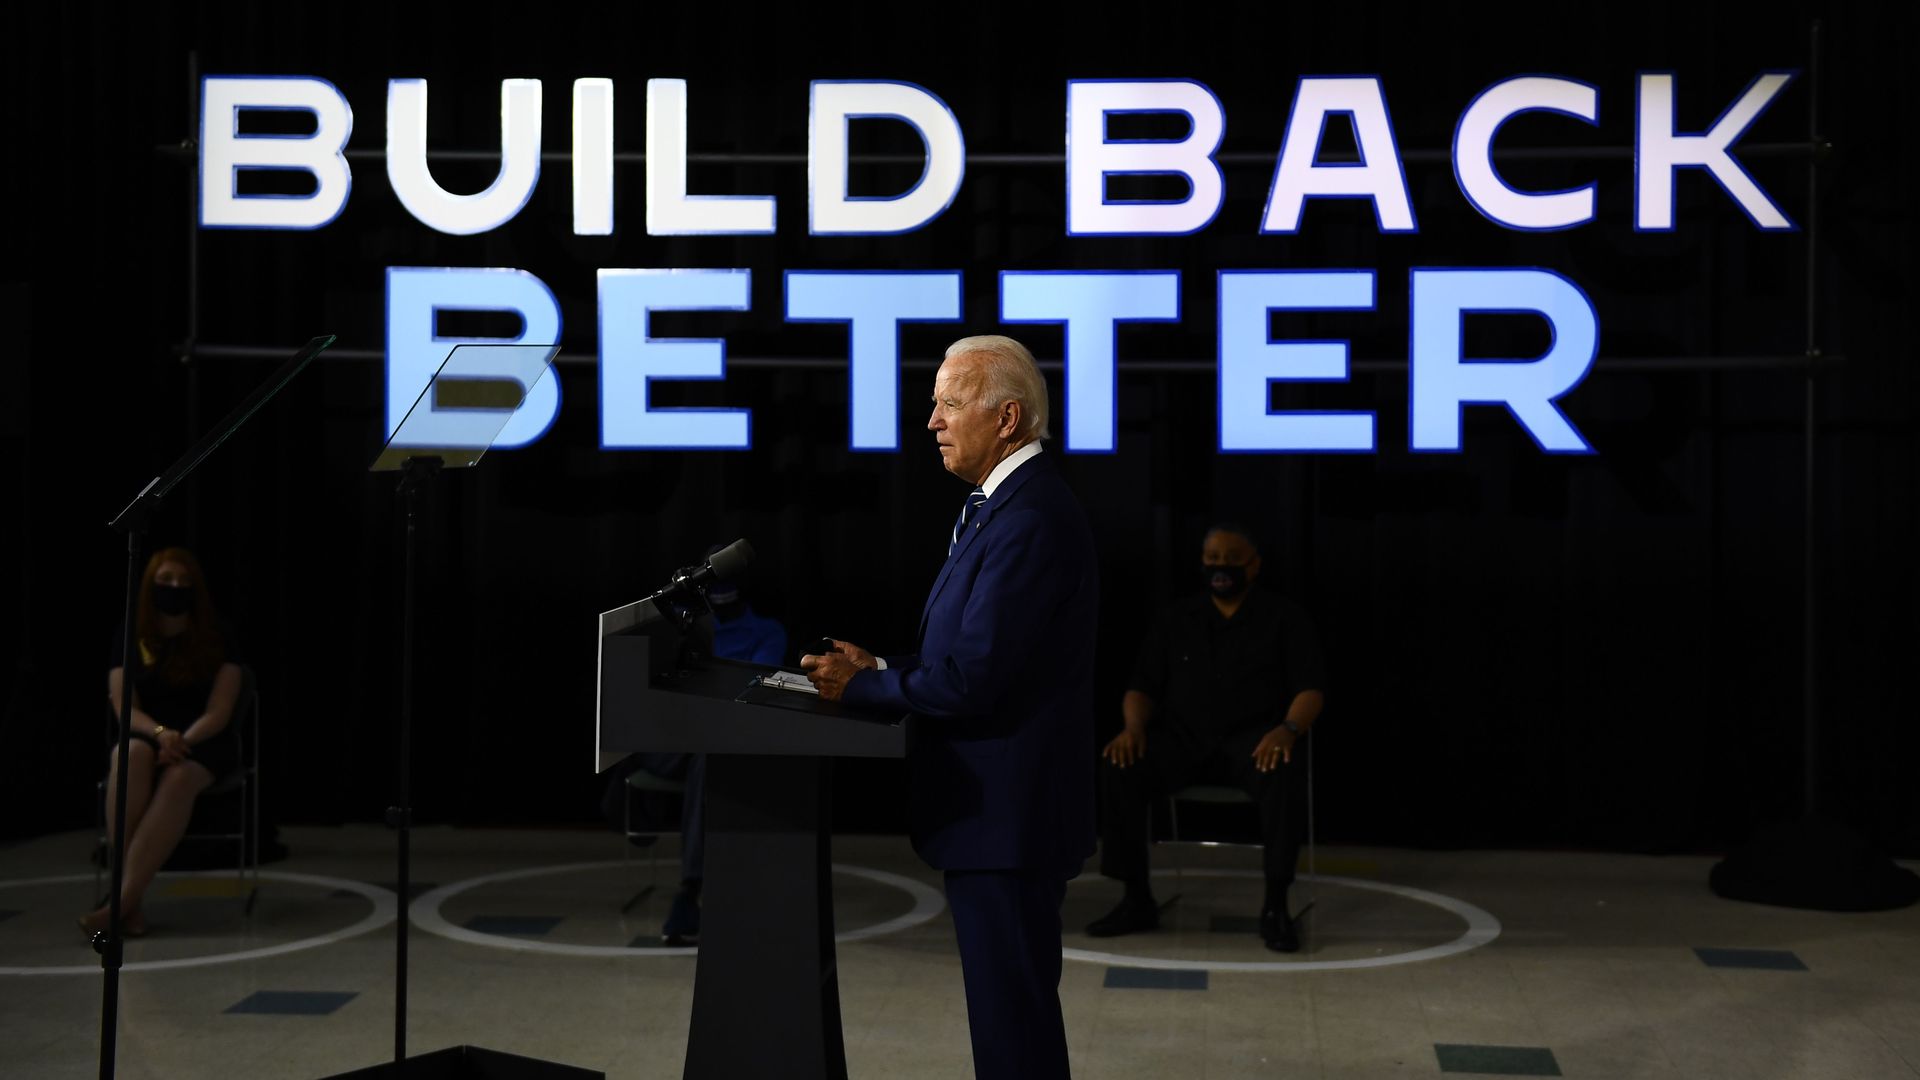 Photo of President Biden speaking in front of a large graphic of the words "Build Back Better"